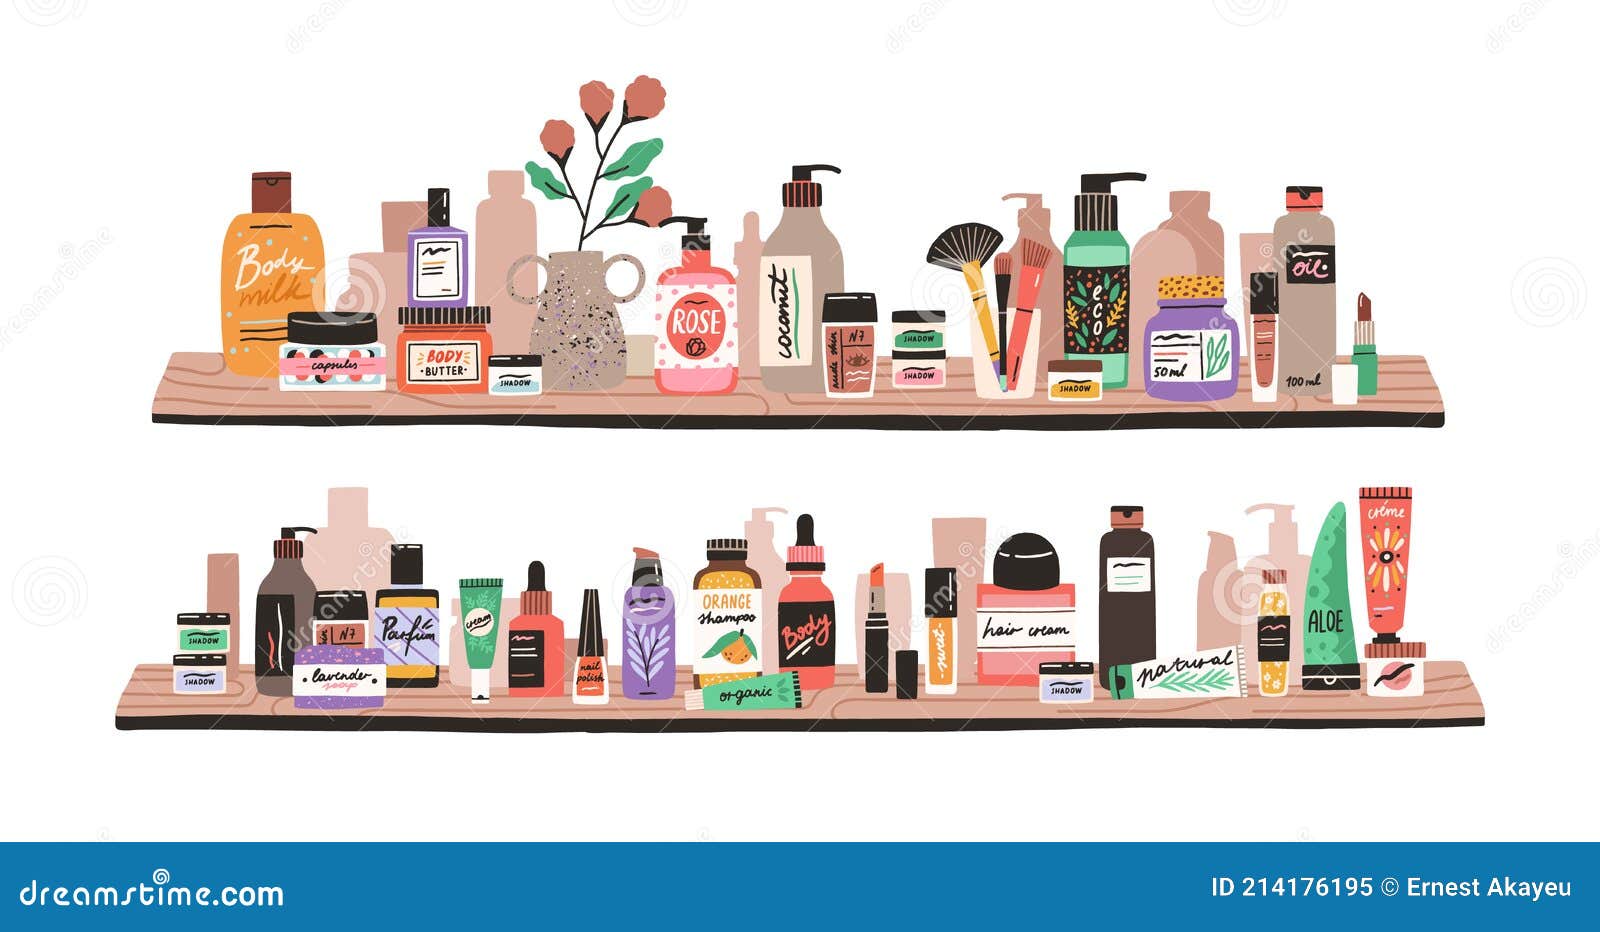 beauty and skincare cosmetic products, decorative cosmetics, makeup items, perfumery and toiletries in bottles and tubes